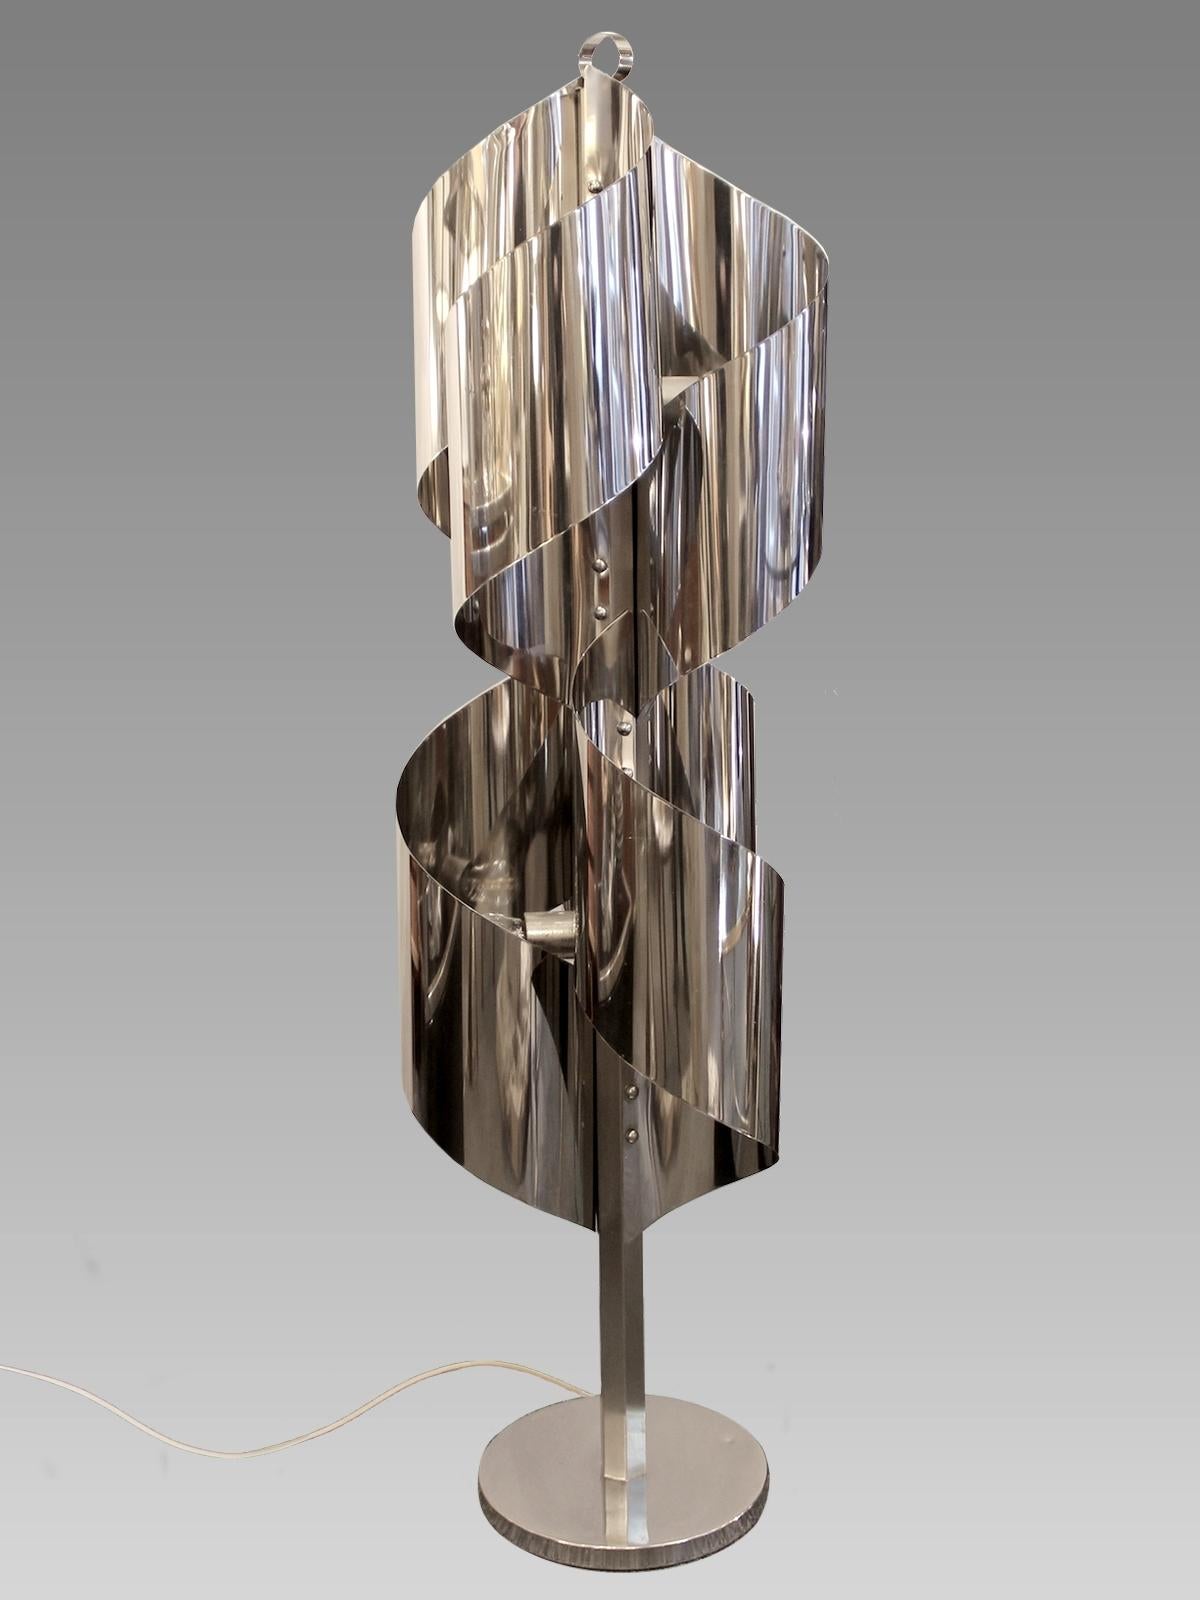 Floor lamp in the shape of a spiral, made of shiny stainless steel sheets formed and riveted on a central axis,
Italy, circa 1970.

Measure: Diameter of the base 11 in.